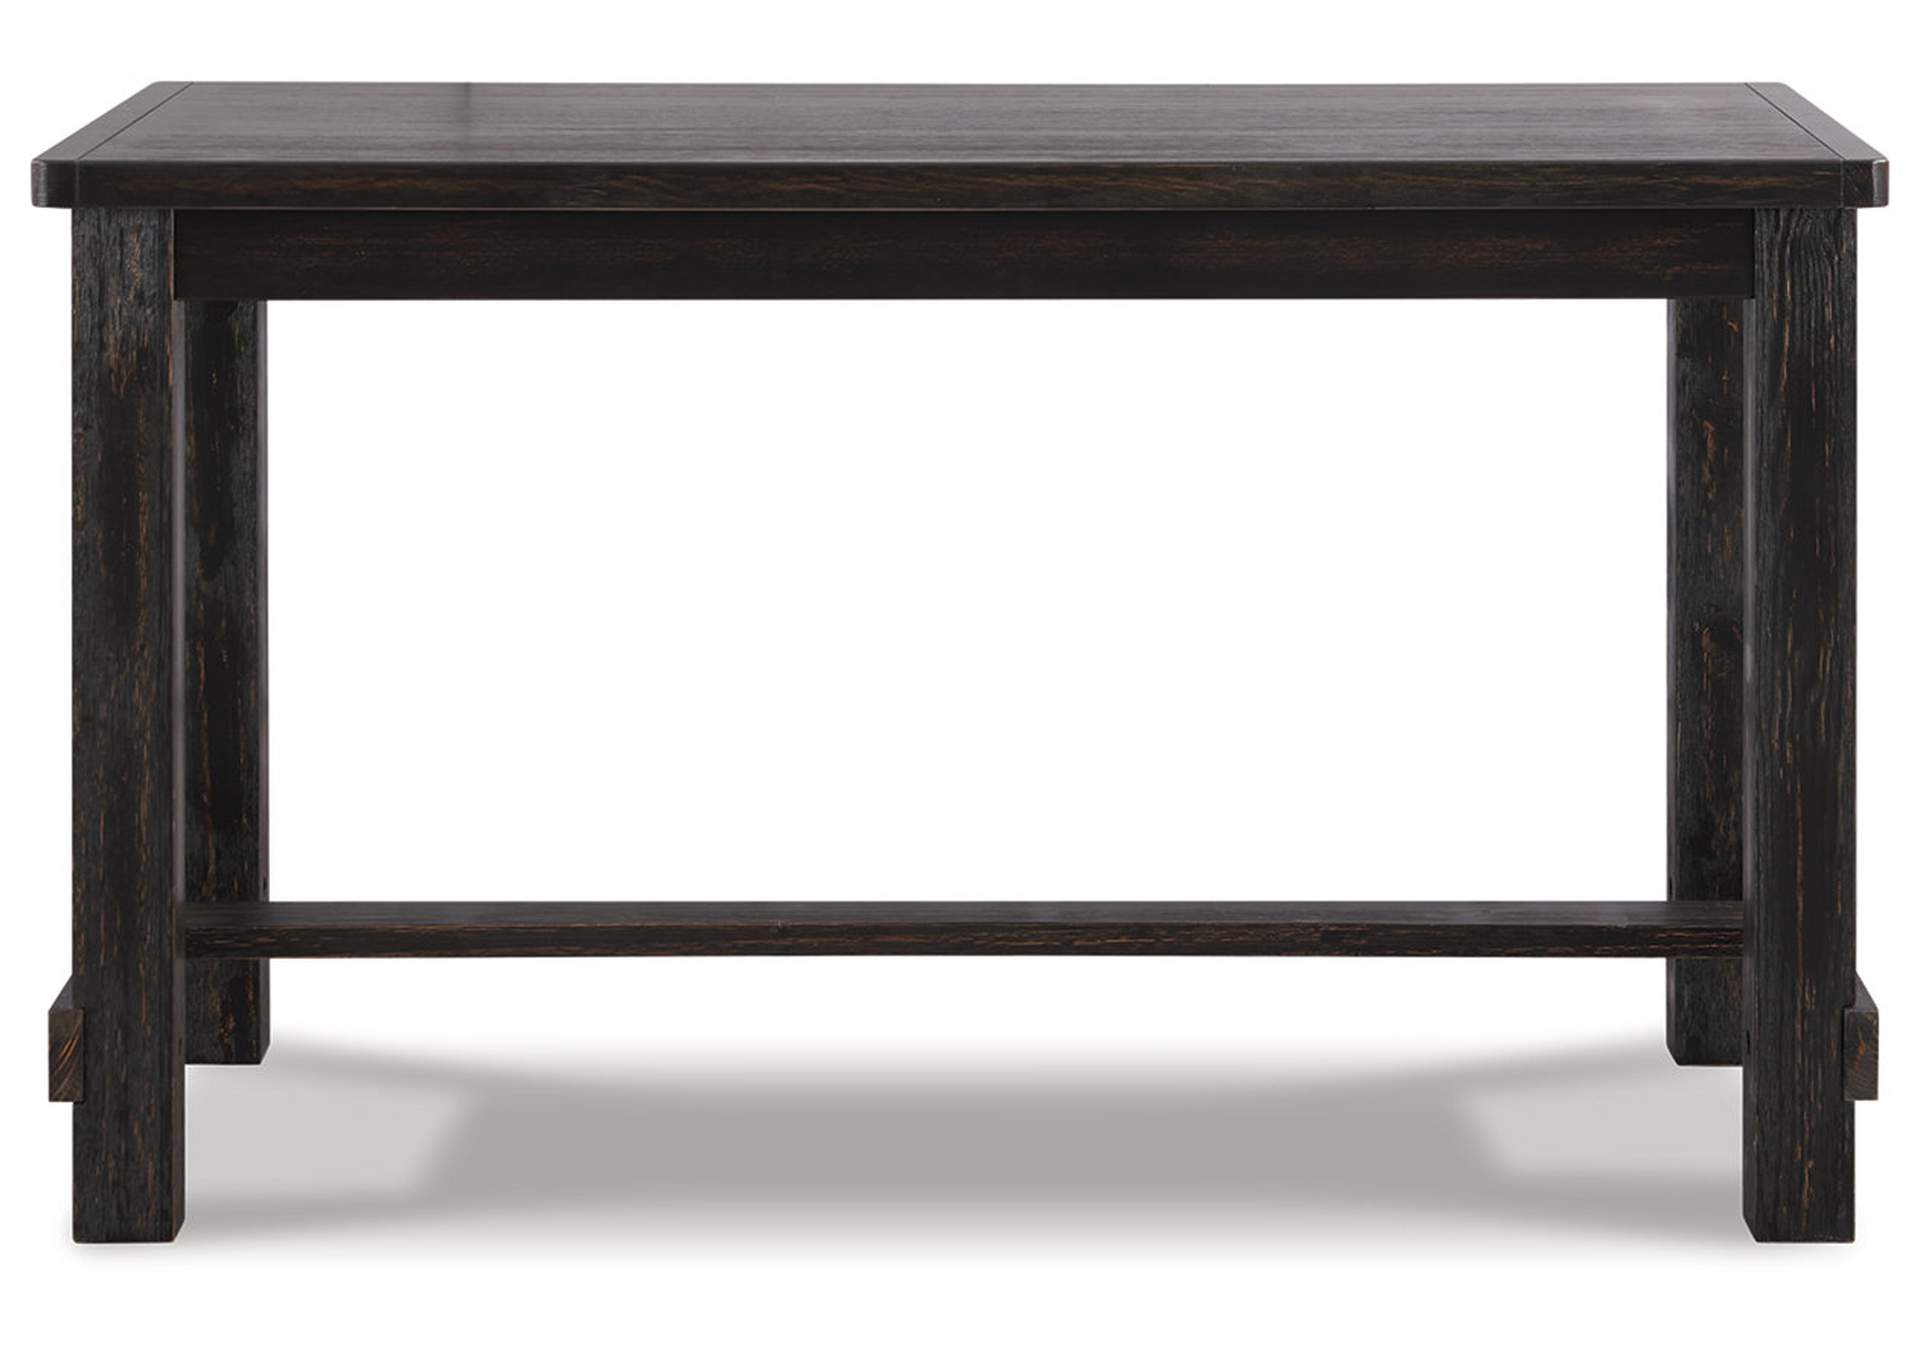 Jeanette Counter Height Dining Table,Signature Design By Ashley